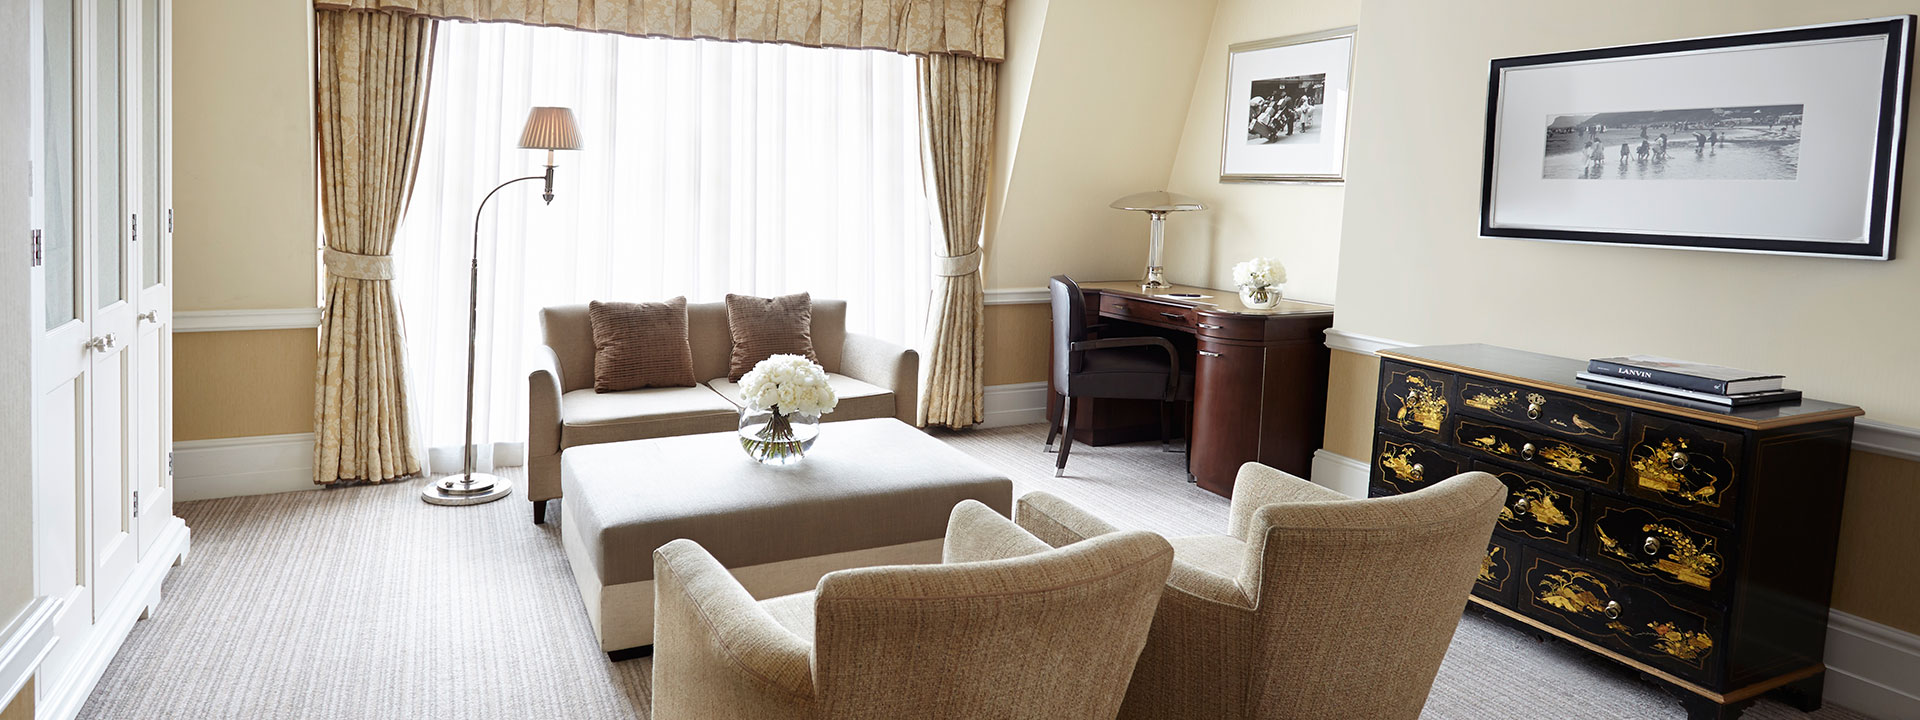 Sitting area in classic interior style, beige sofa and armchair in the Deluxe Junior Suite at The Connaught.